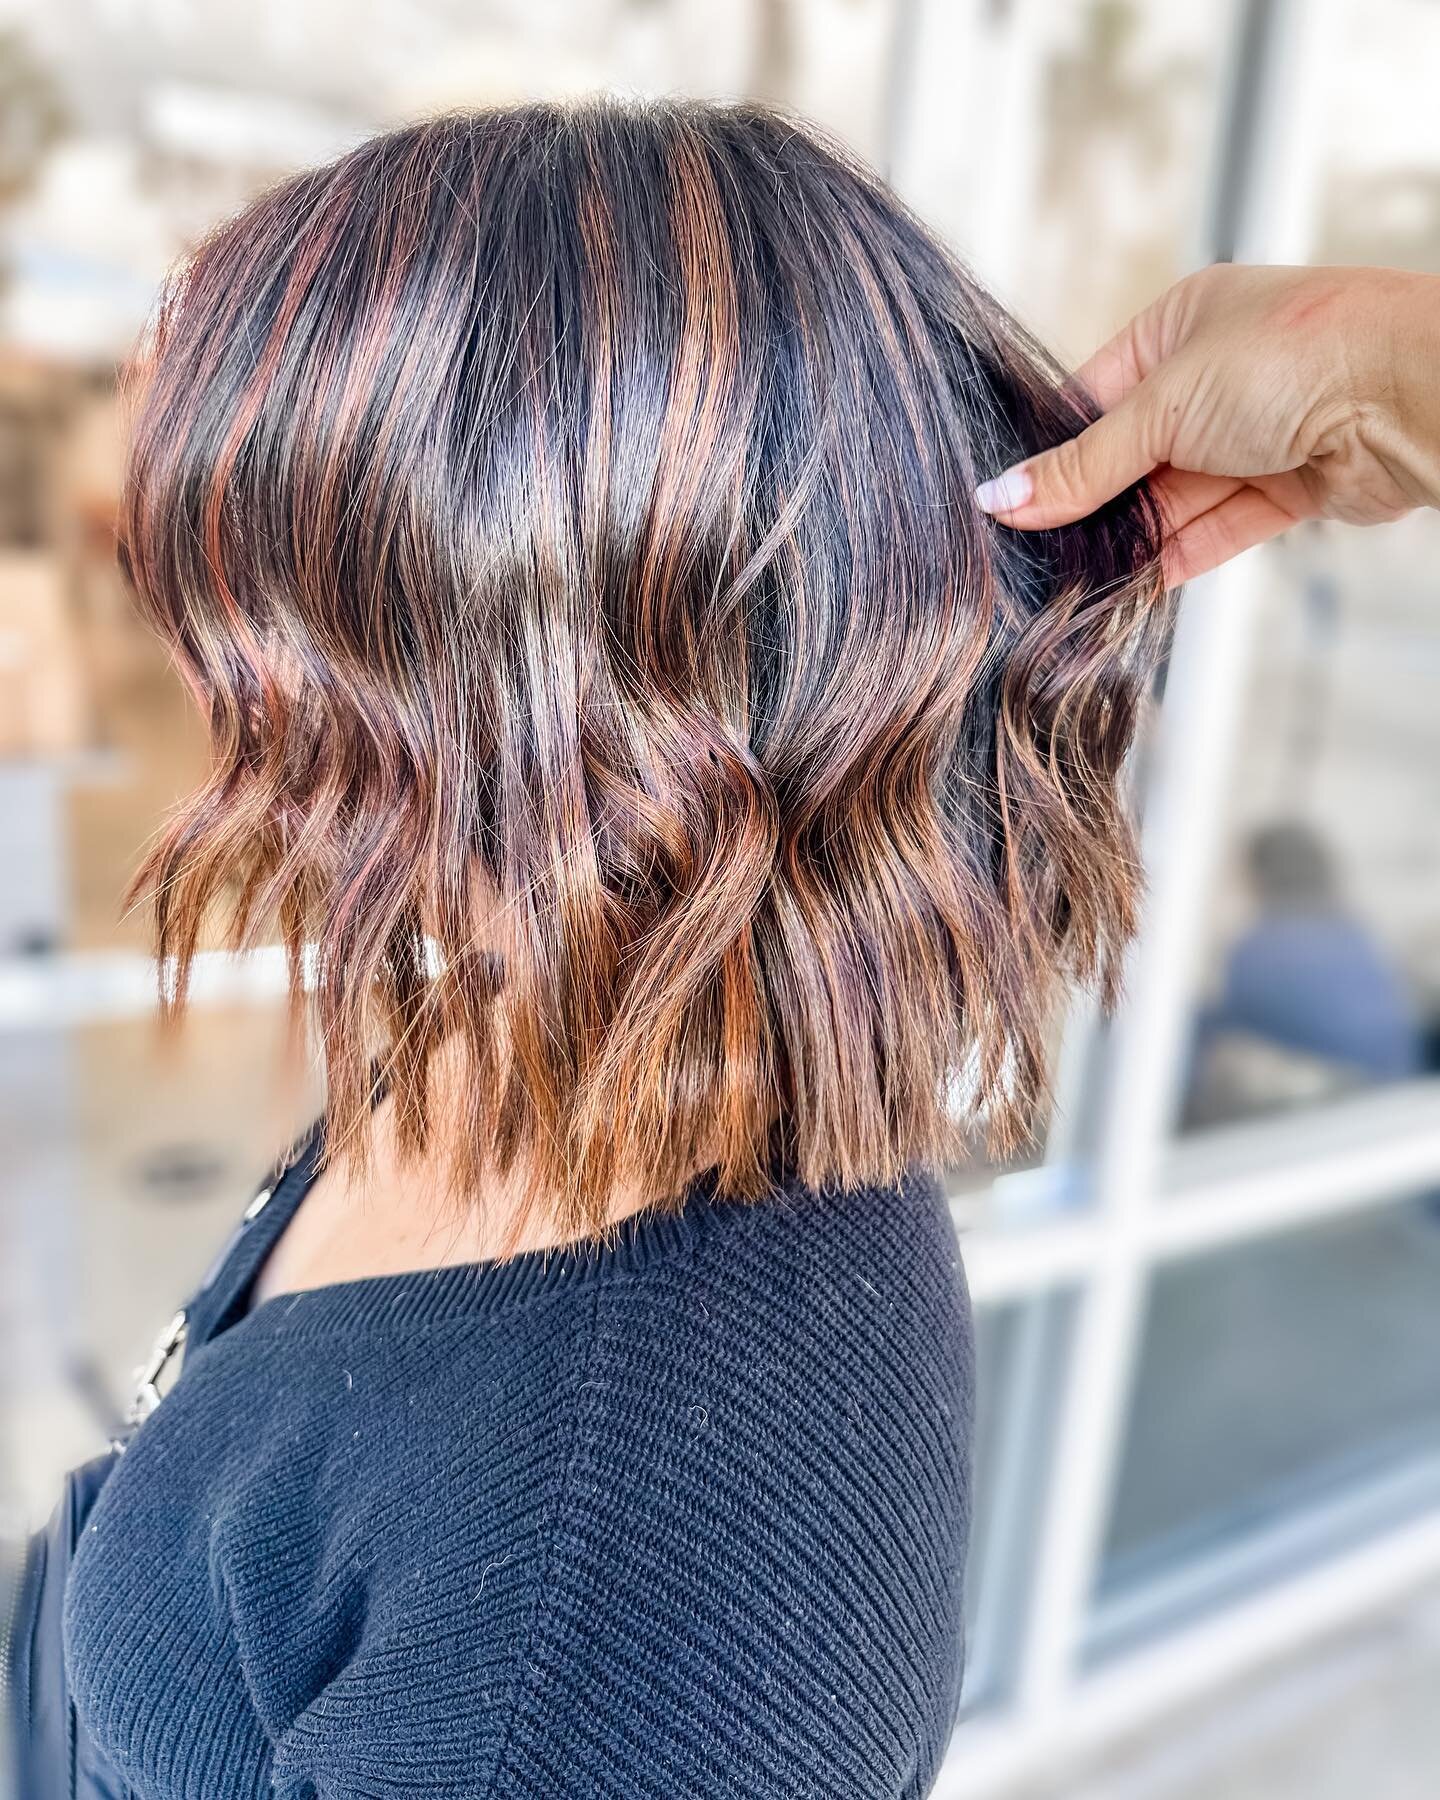 Short Sweet and topped with Amber Glaze by @redken Shades EQ. Who else is craving a new warm look? Done by @dizdidit